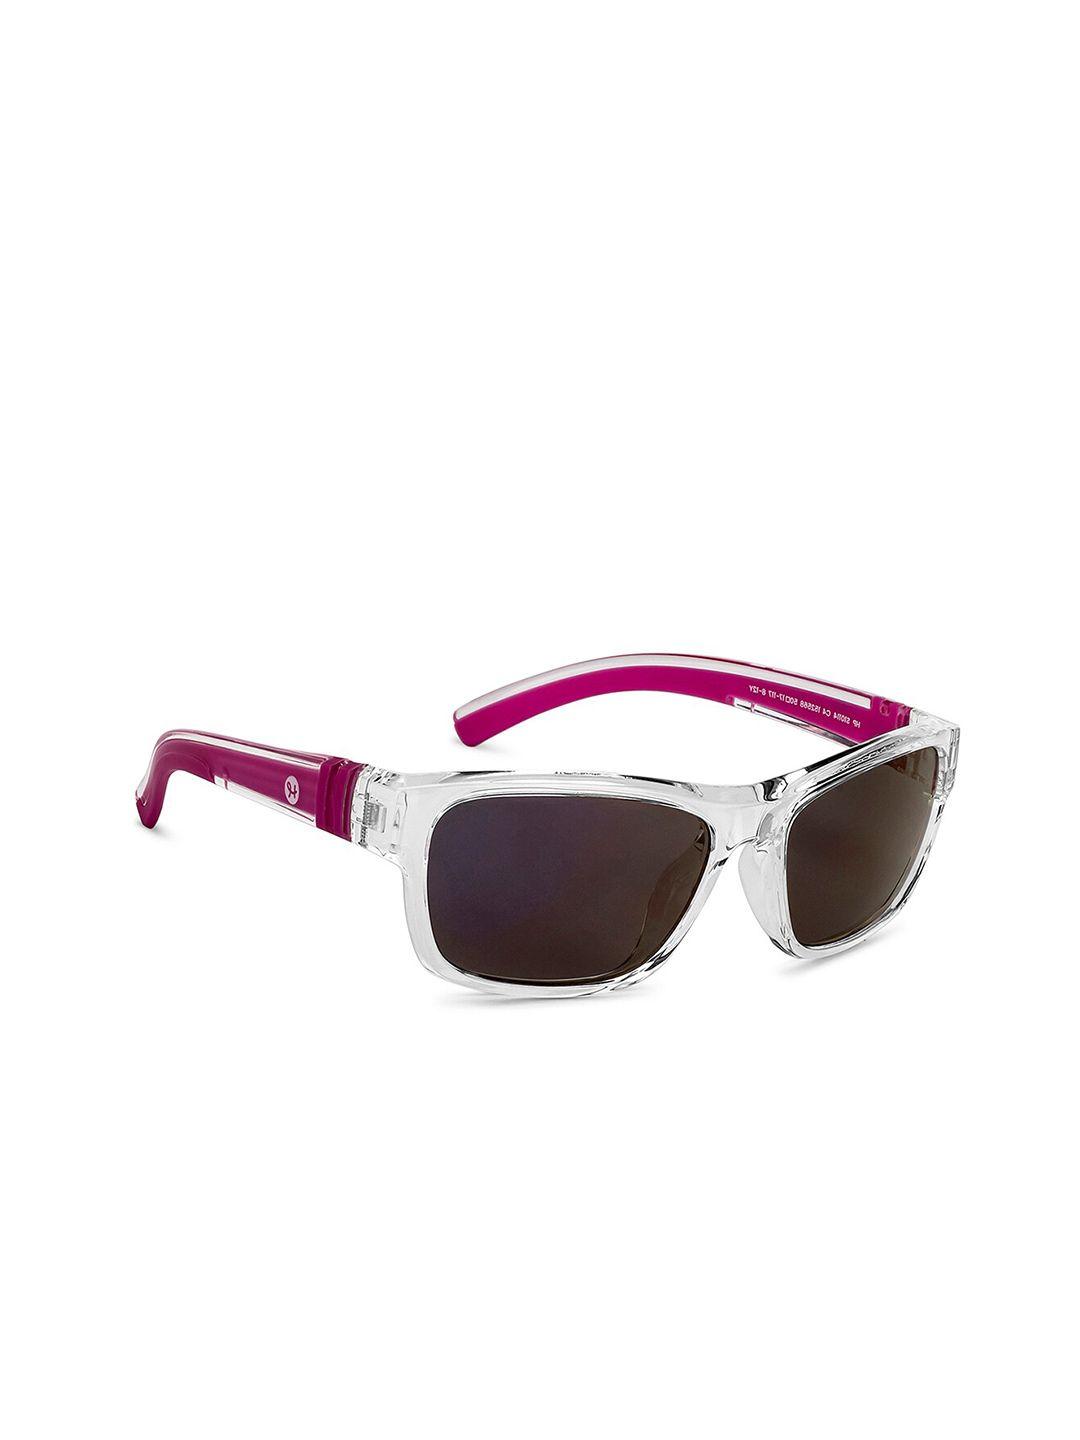 hooper-boys-rectangle-sunglasses-with-uv-protected-lens-152568